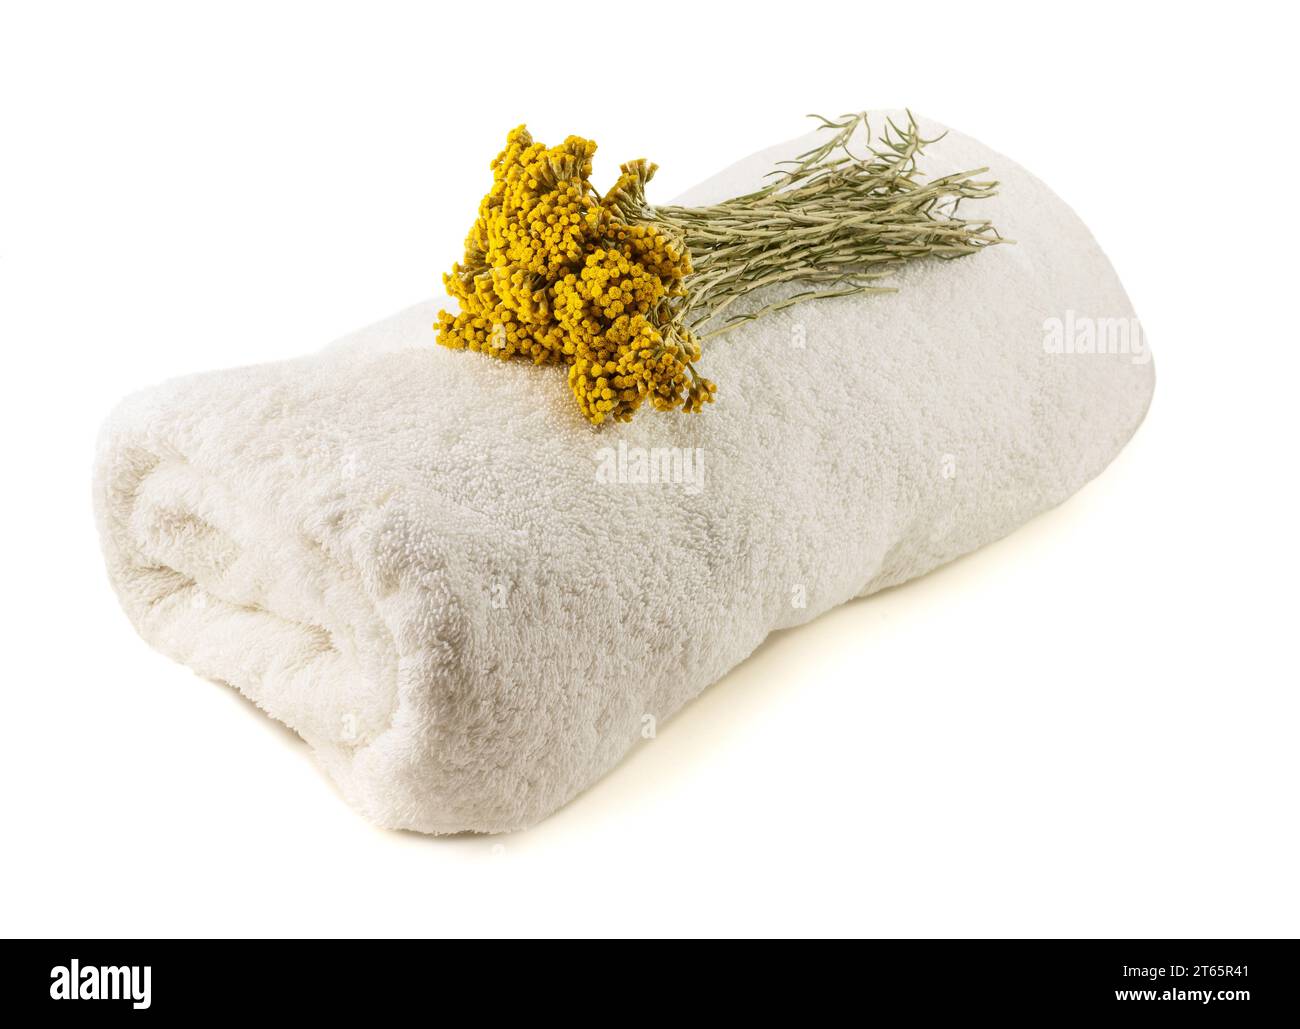 Helichrysum flowers with towel isolated on white background Stock Photo